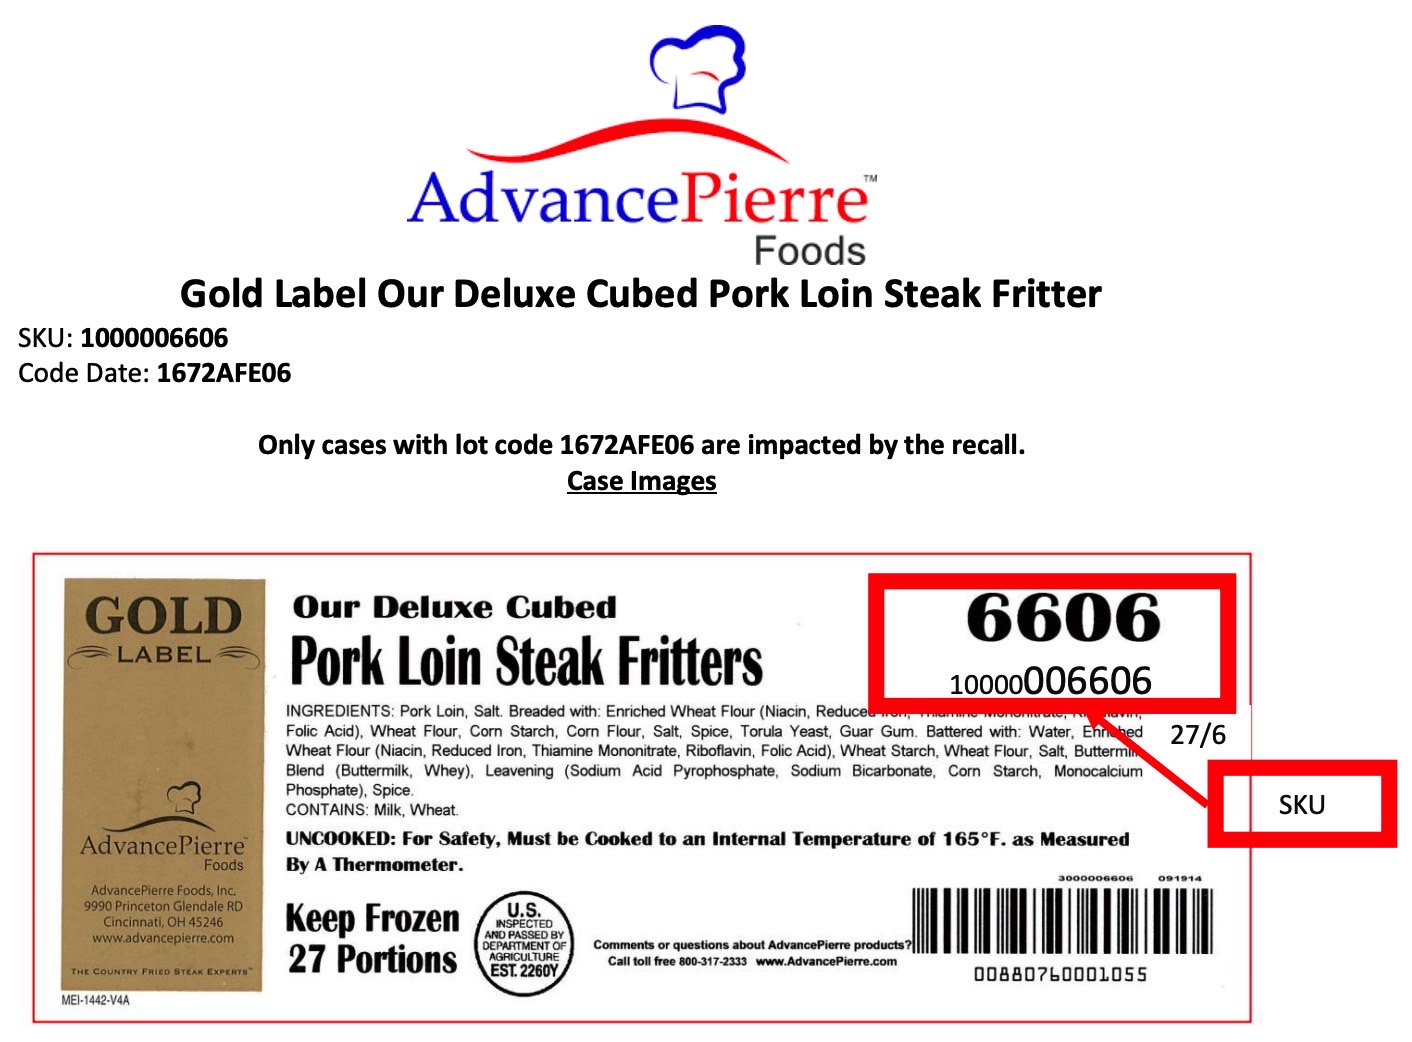 AdvancePierre Foods pork fritters recall: Case identifiers for the recalled lot.